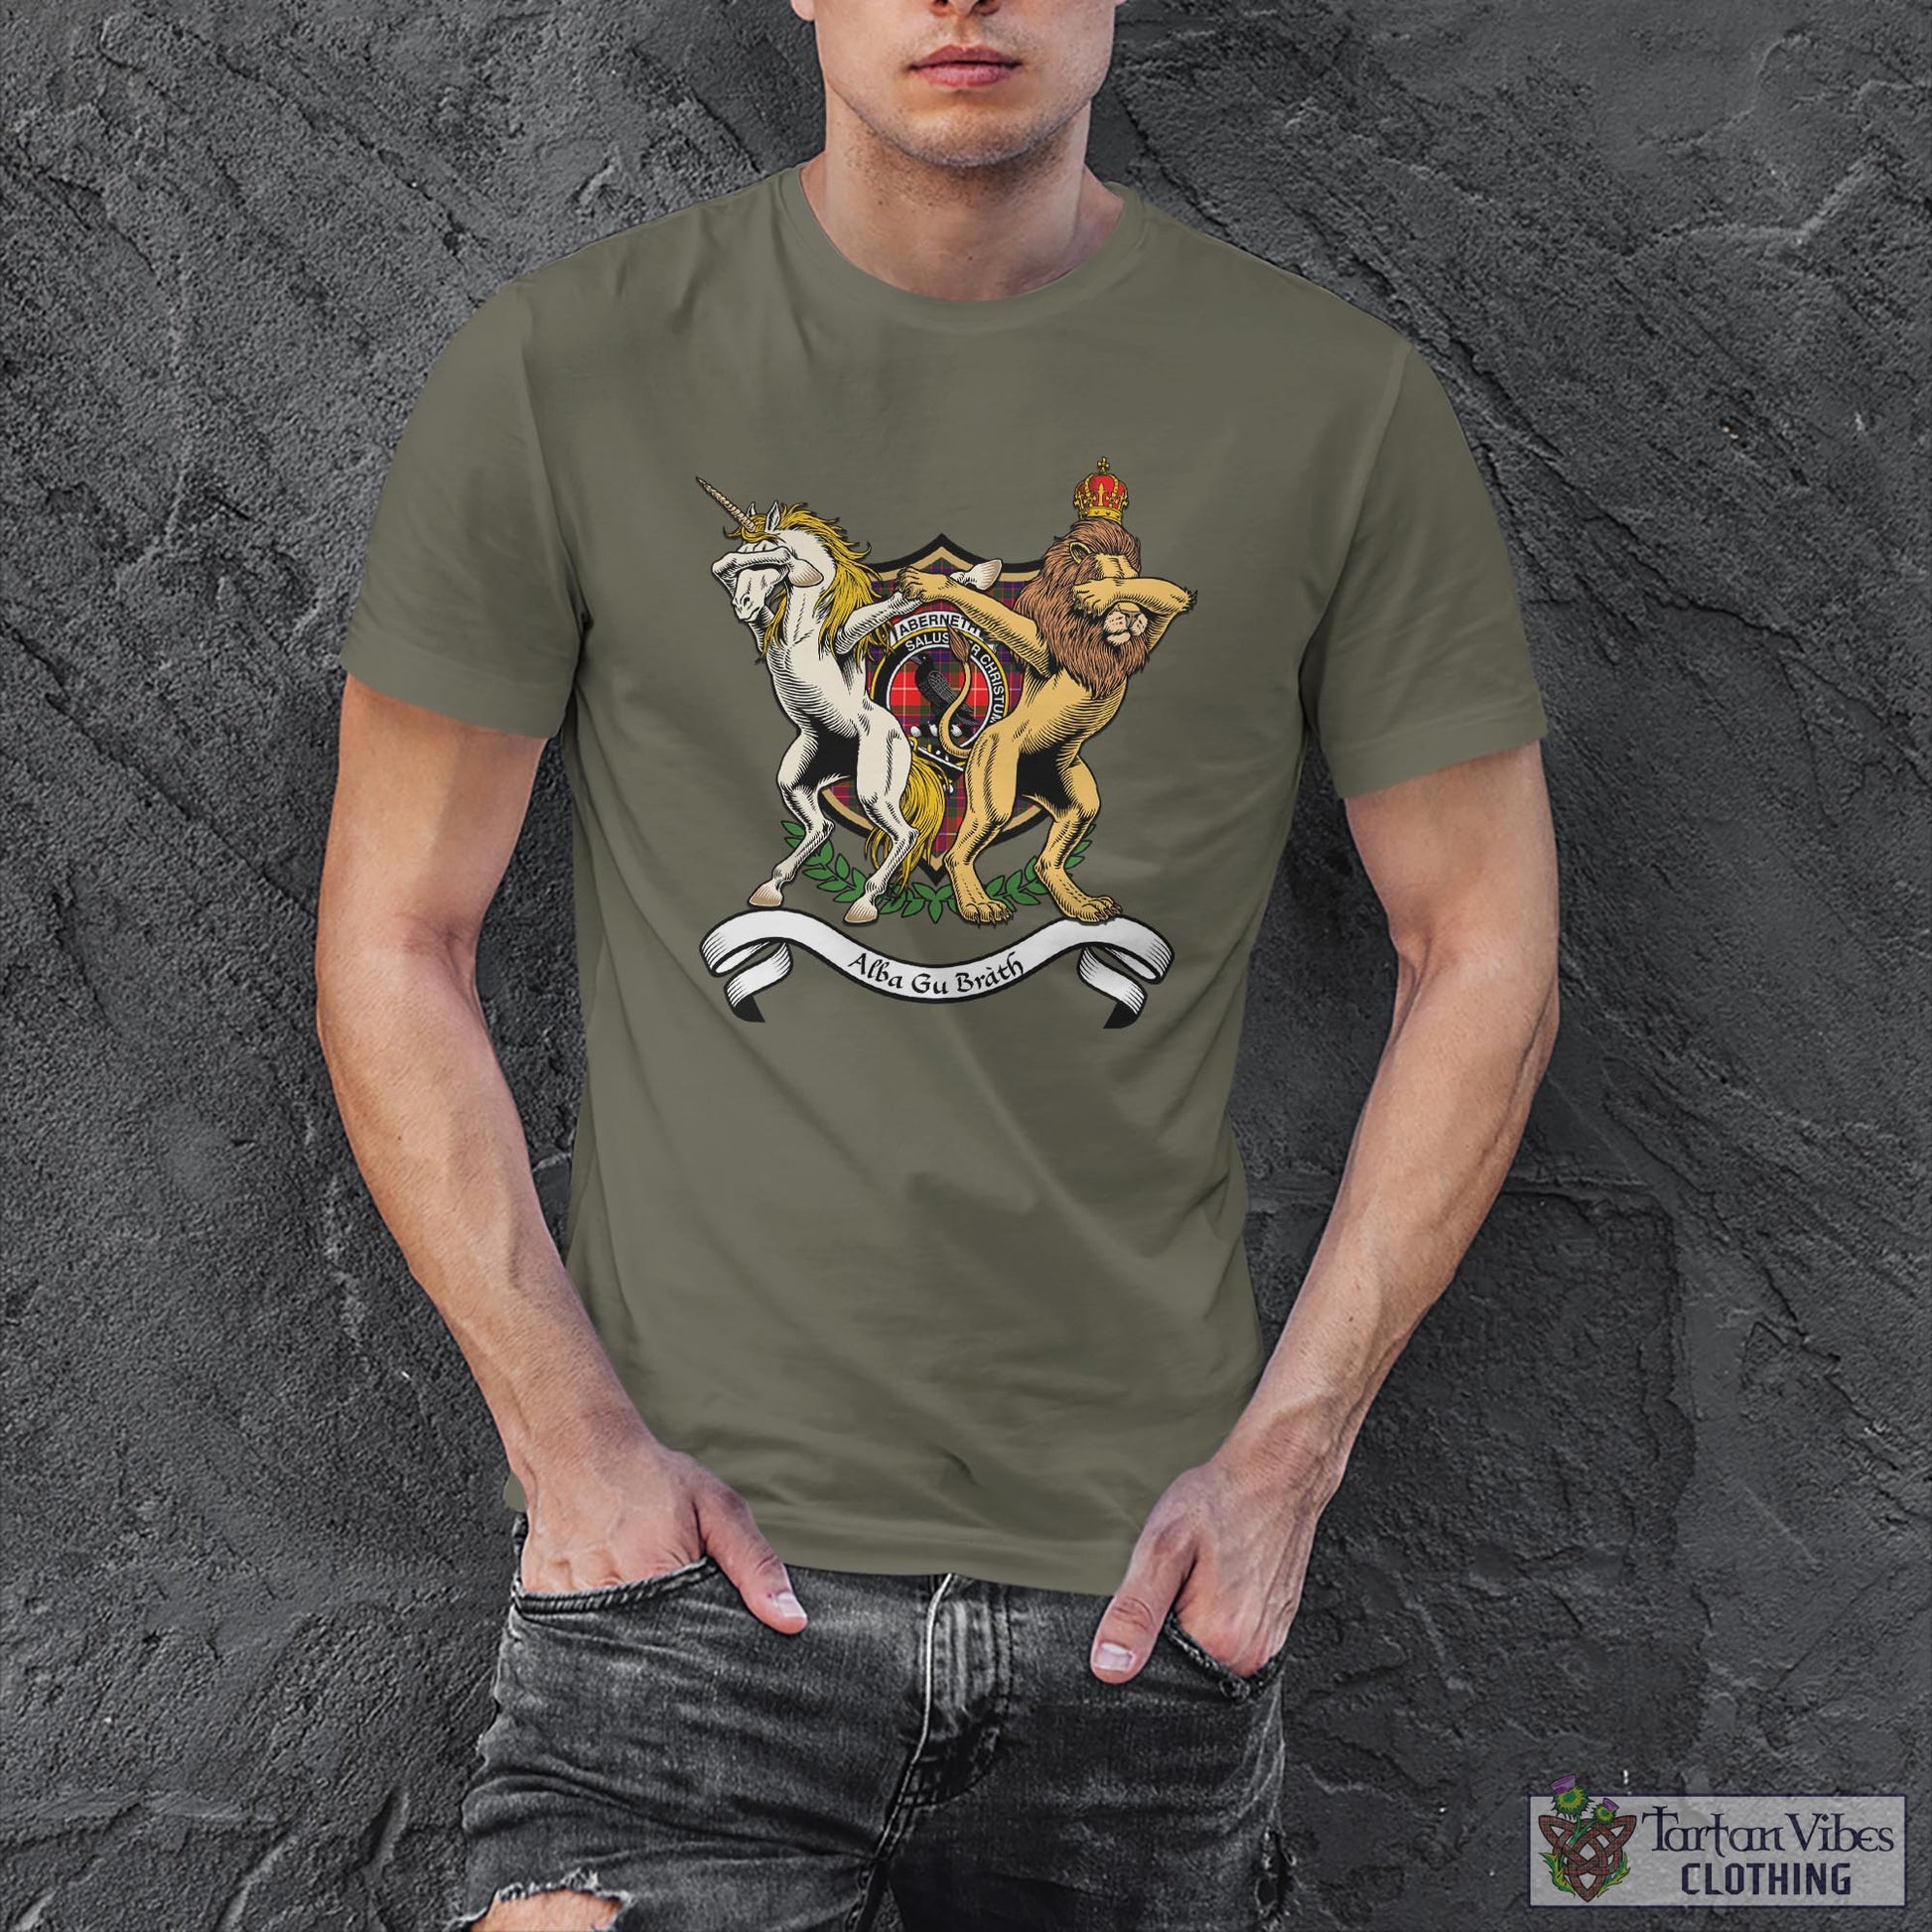 Tartan Vibes Clothing Abernethy Family Crest Cotton Men's T-Shirt with Scotland Royal Coat Of Arm Funny Style